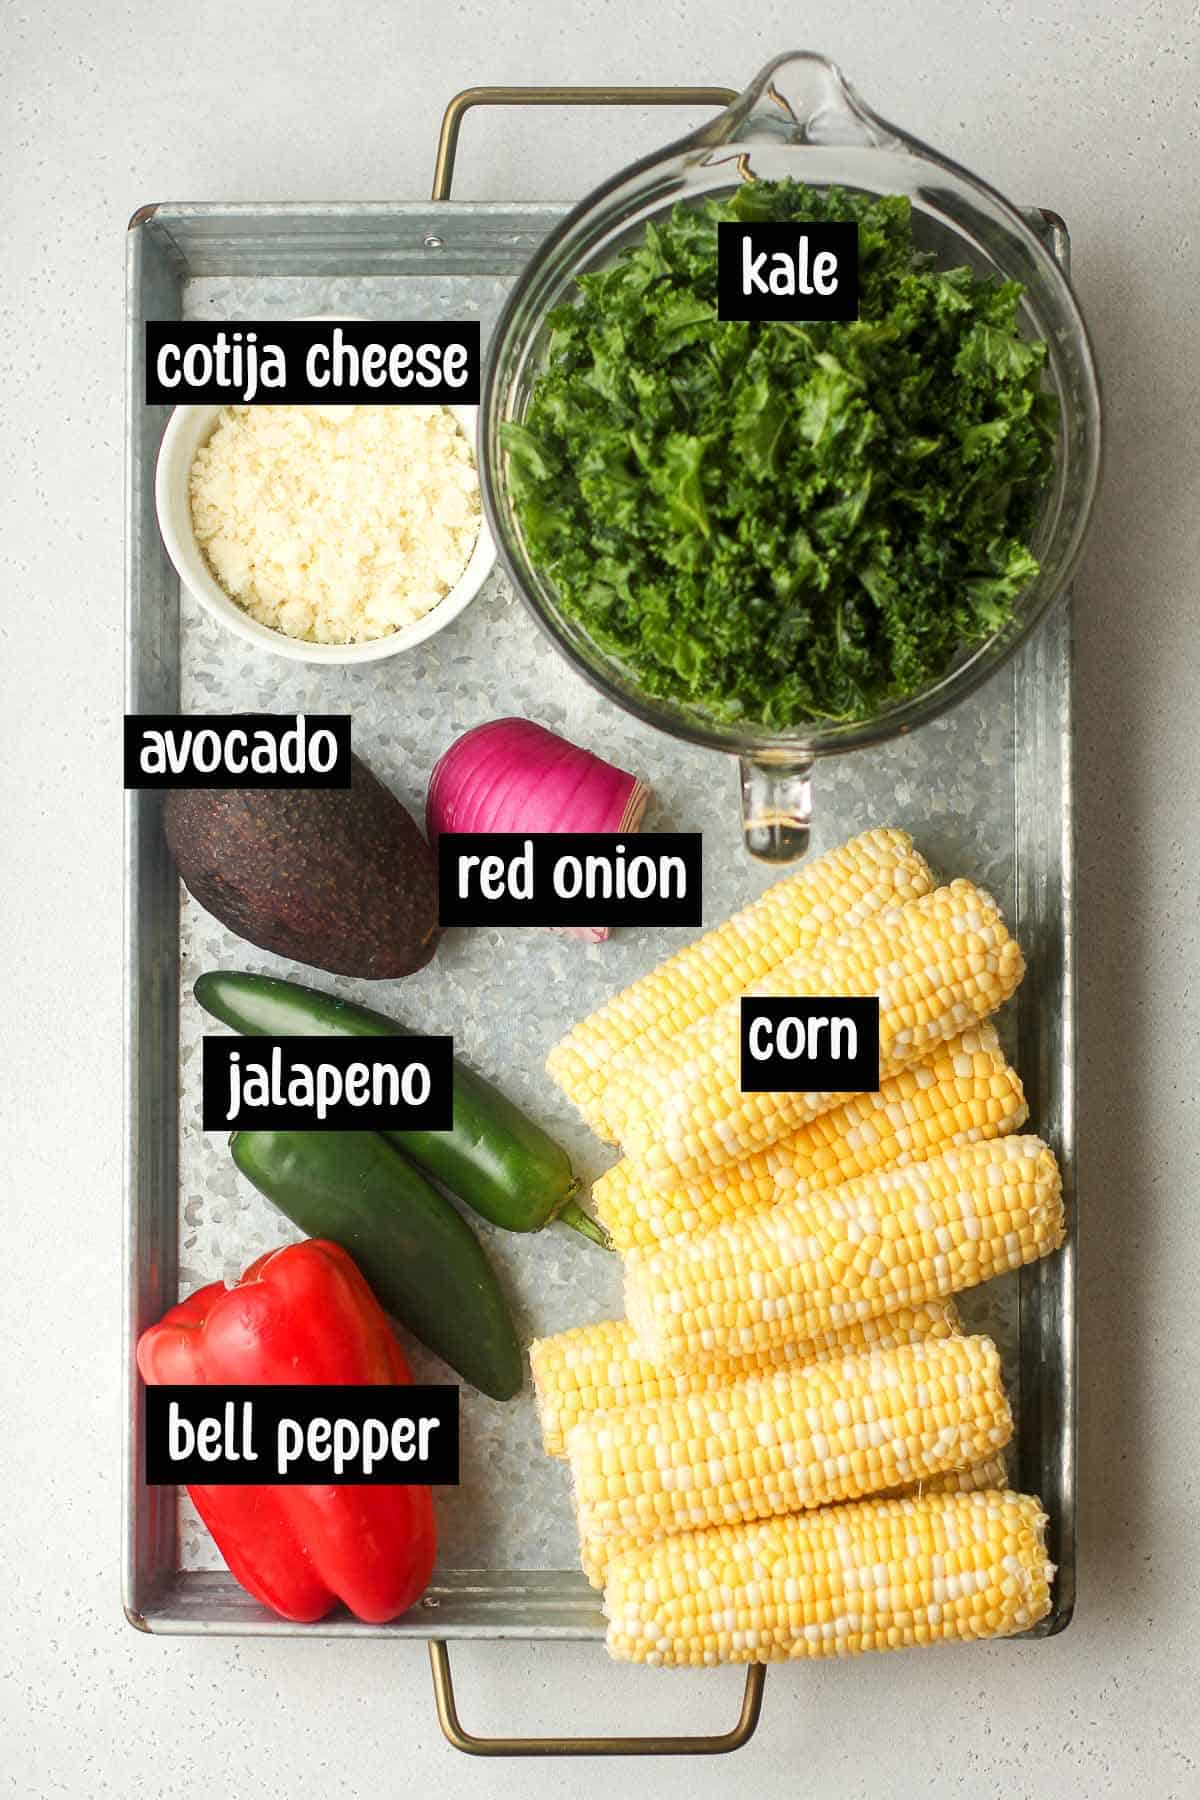 A tray of labeled ingredients for the Mexican street corn kale salad.